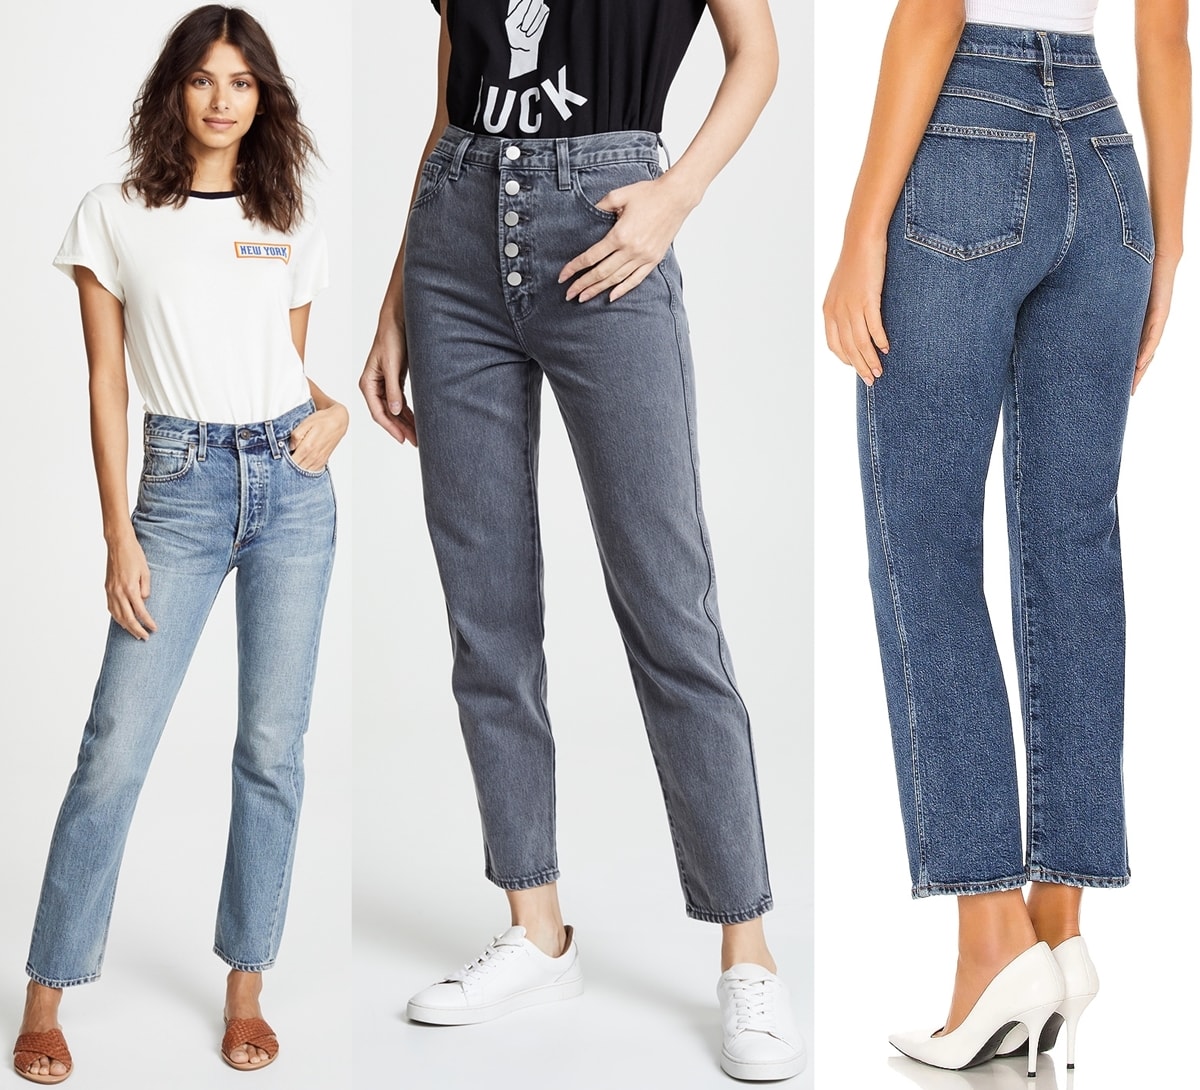 Sleek and versatile: Discover the elegance of straight-leg jeans from Citizens of Humanity, J Brand, and Agolde - the perfect blend of style and comfort for every silhouette